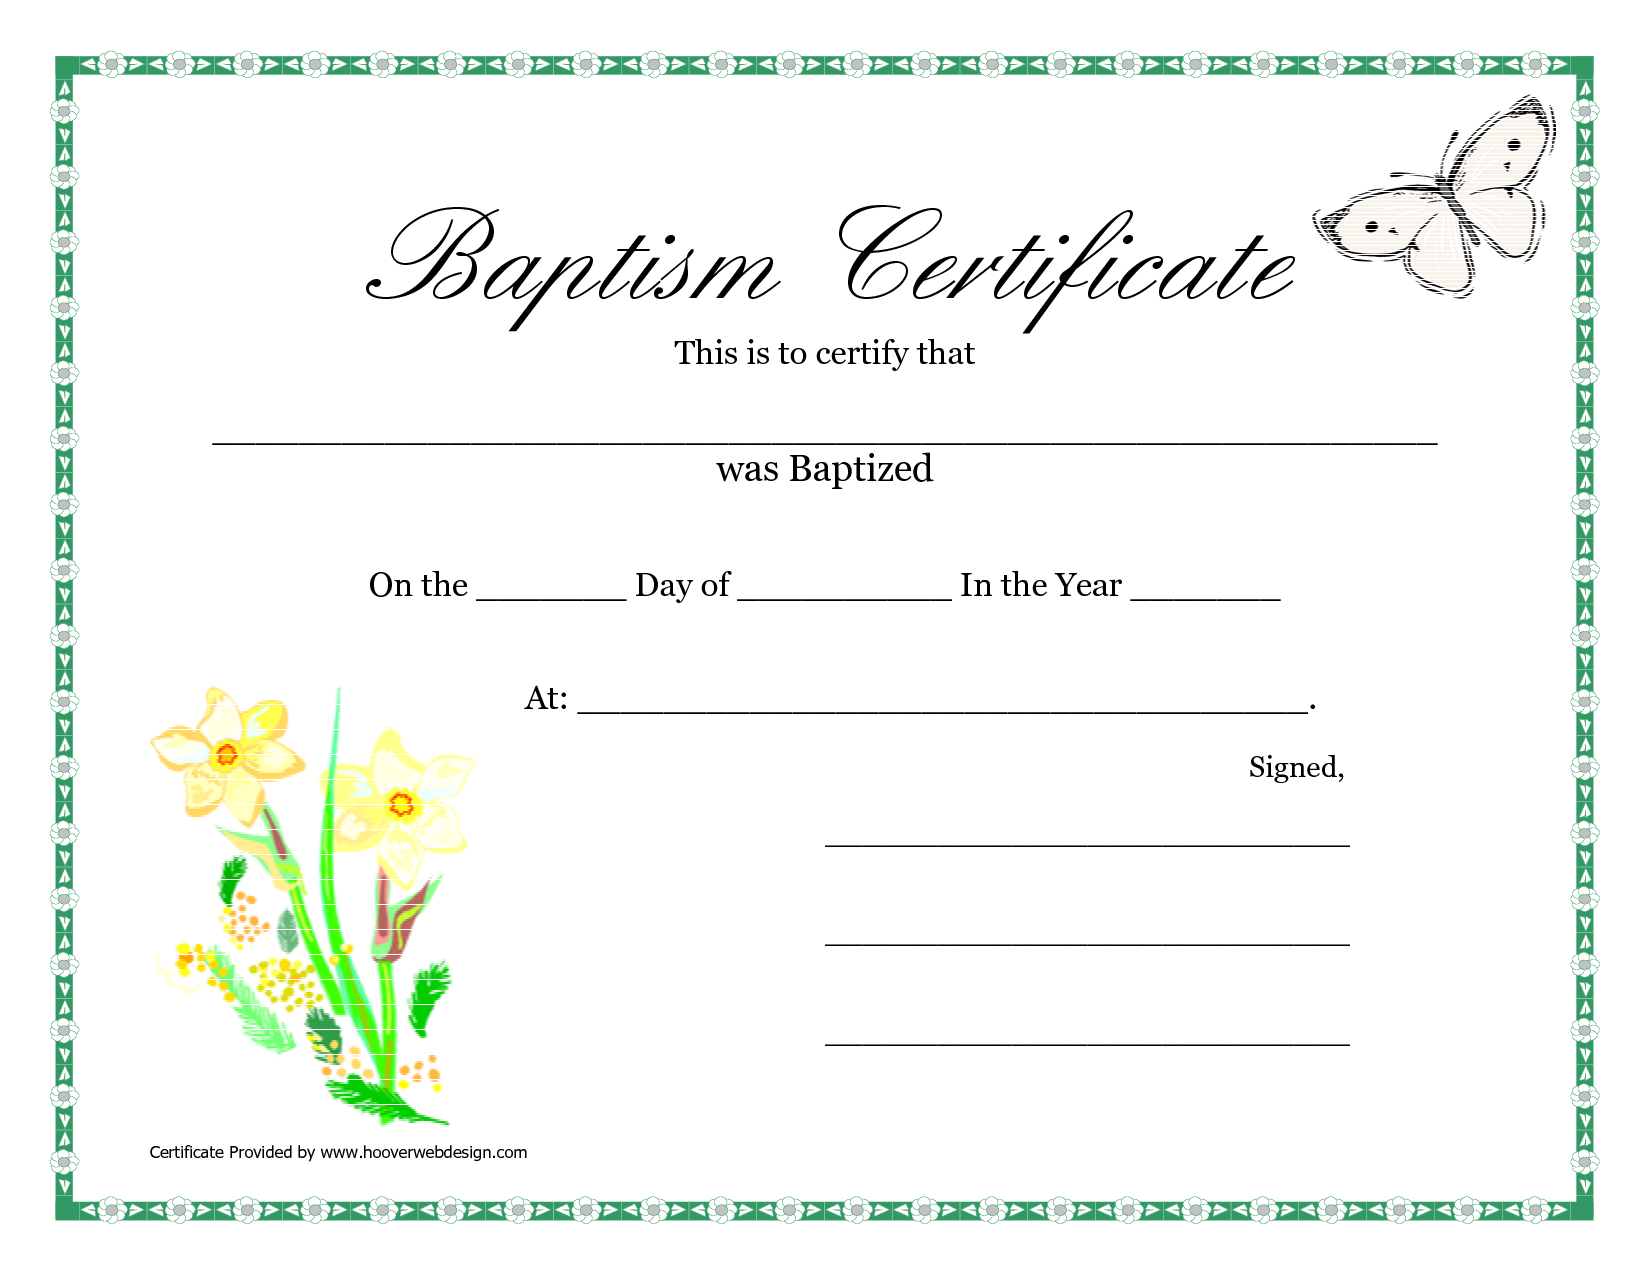 printable-certificate-pdfs-baptism